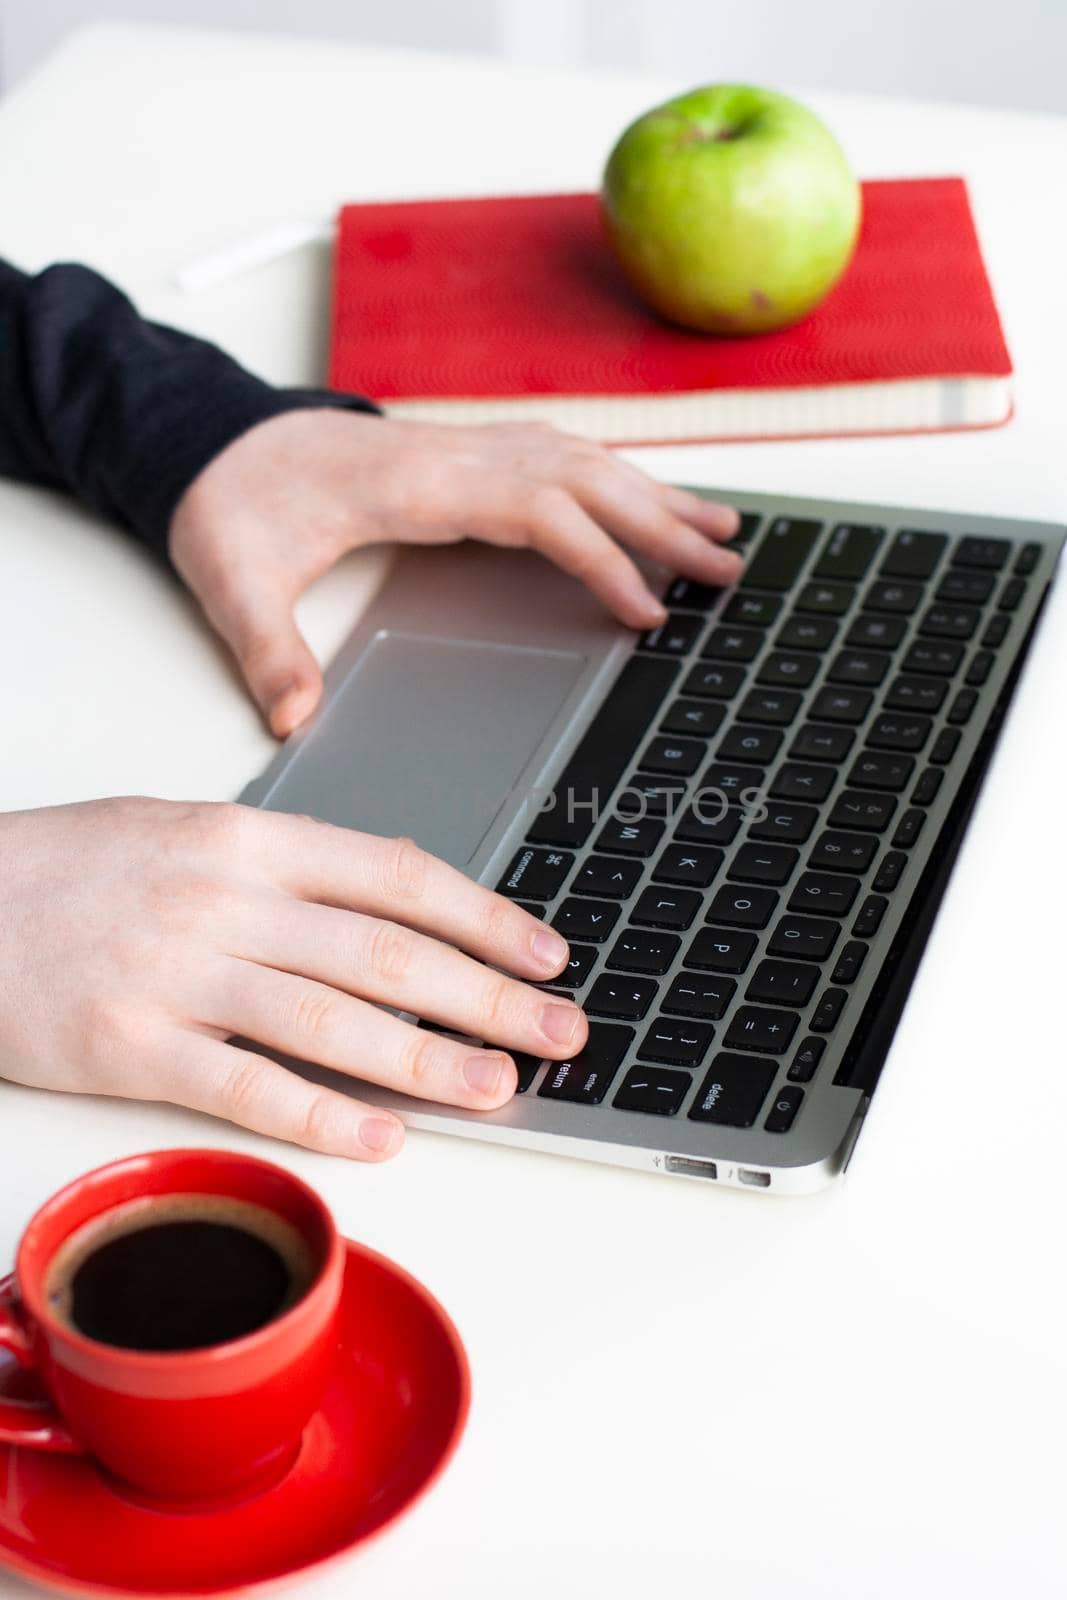 Man hands on wireless keyboard with red notebook, green apple and red cup of coffee on white table